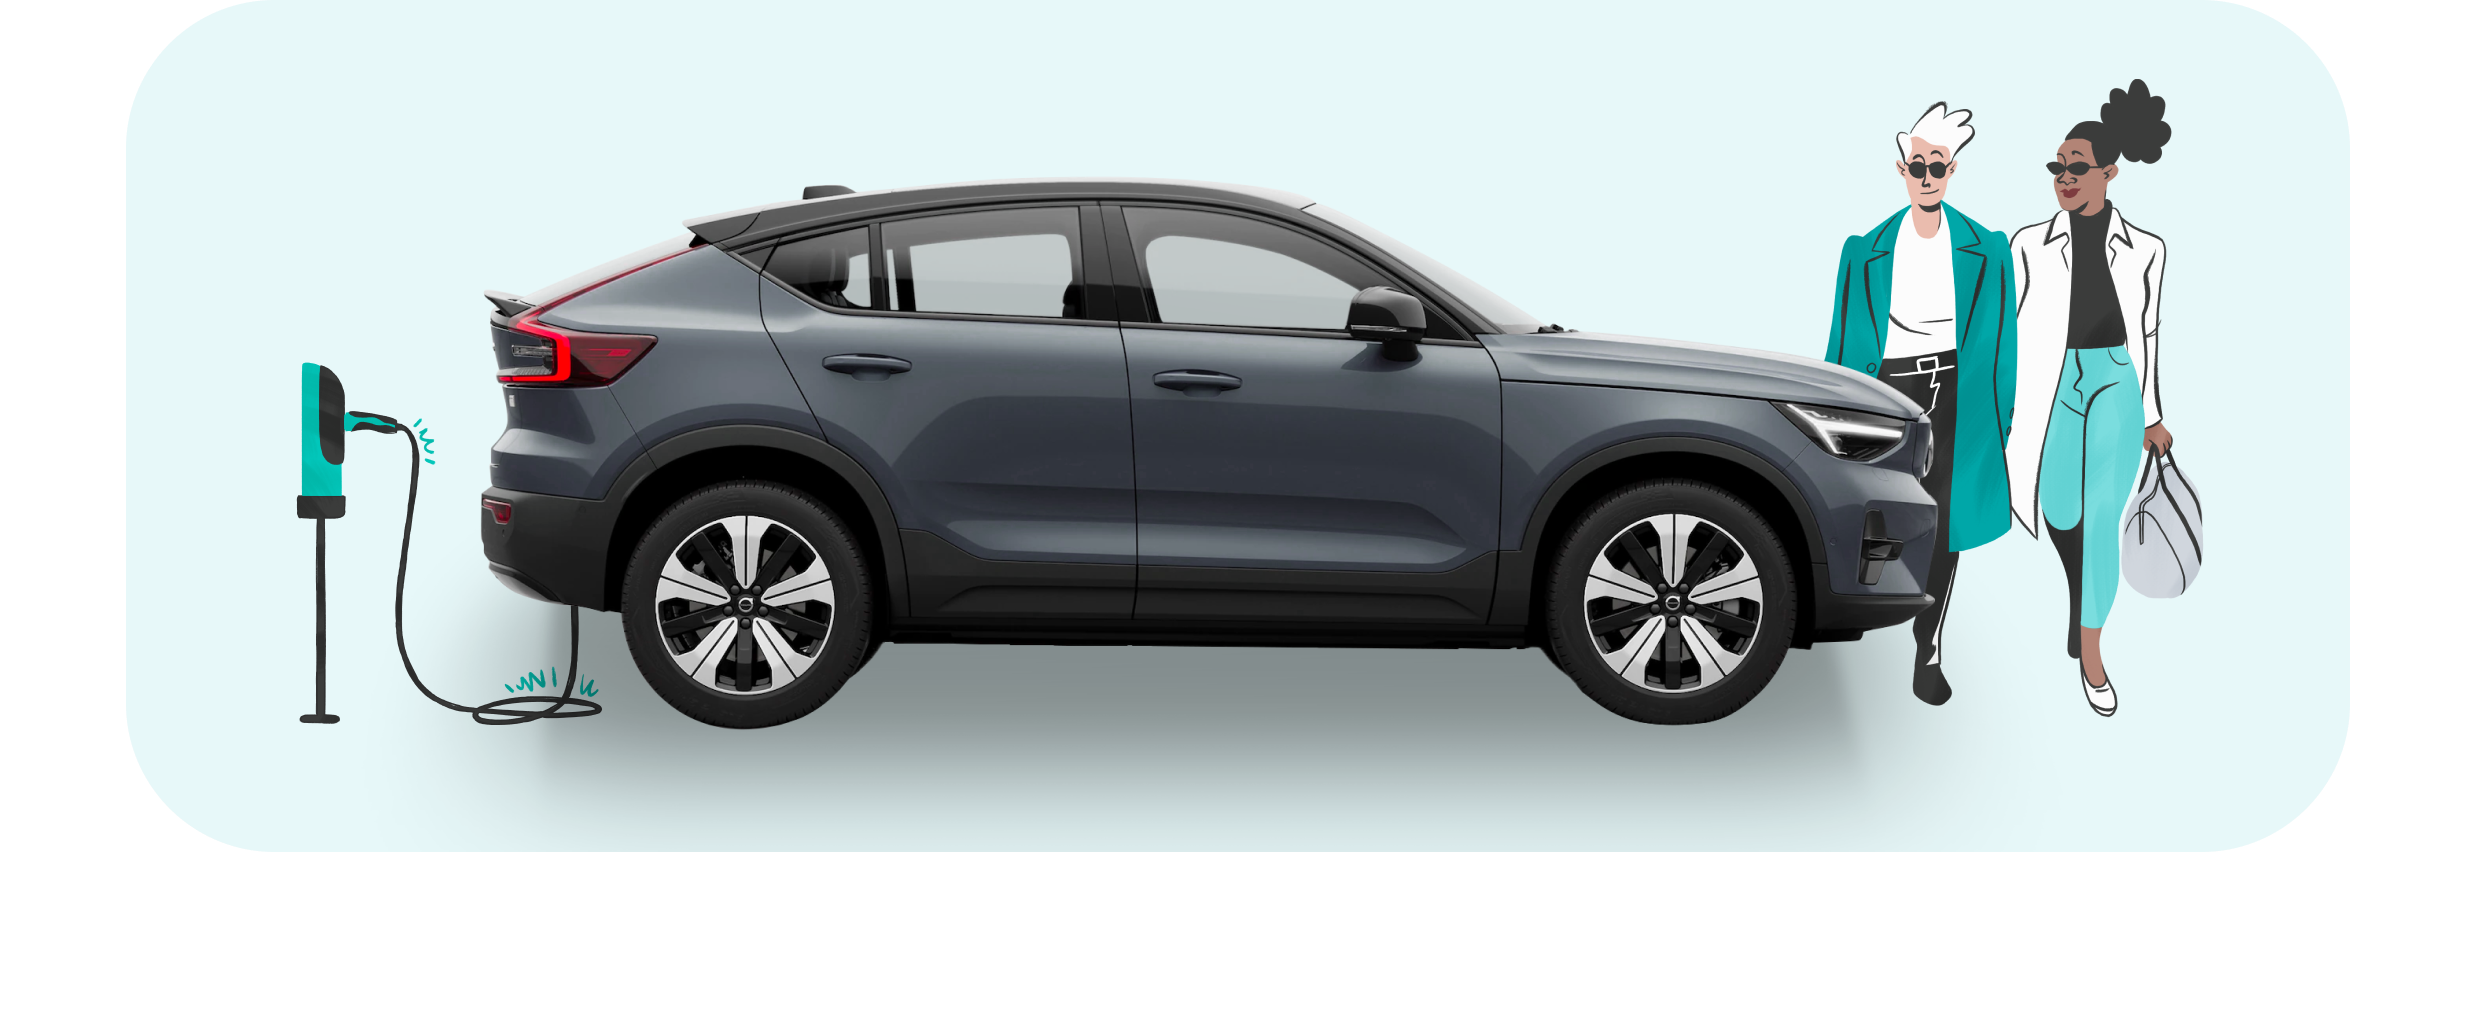 Image of a Volvo C40 on display using the updated Volvo On Demand brand guidelines utilizing both illustration and animation